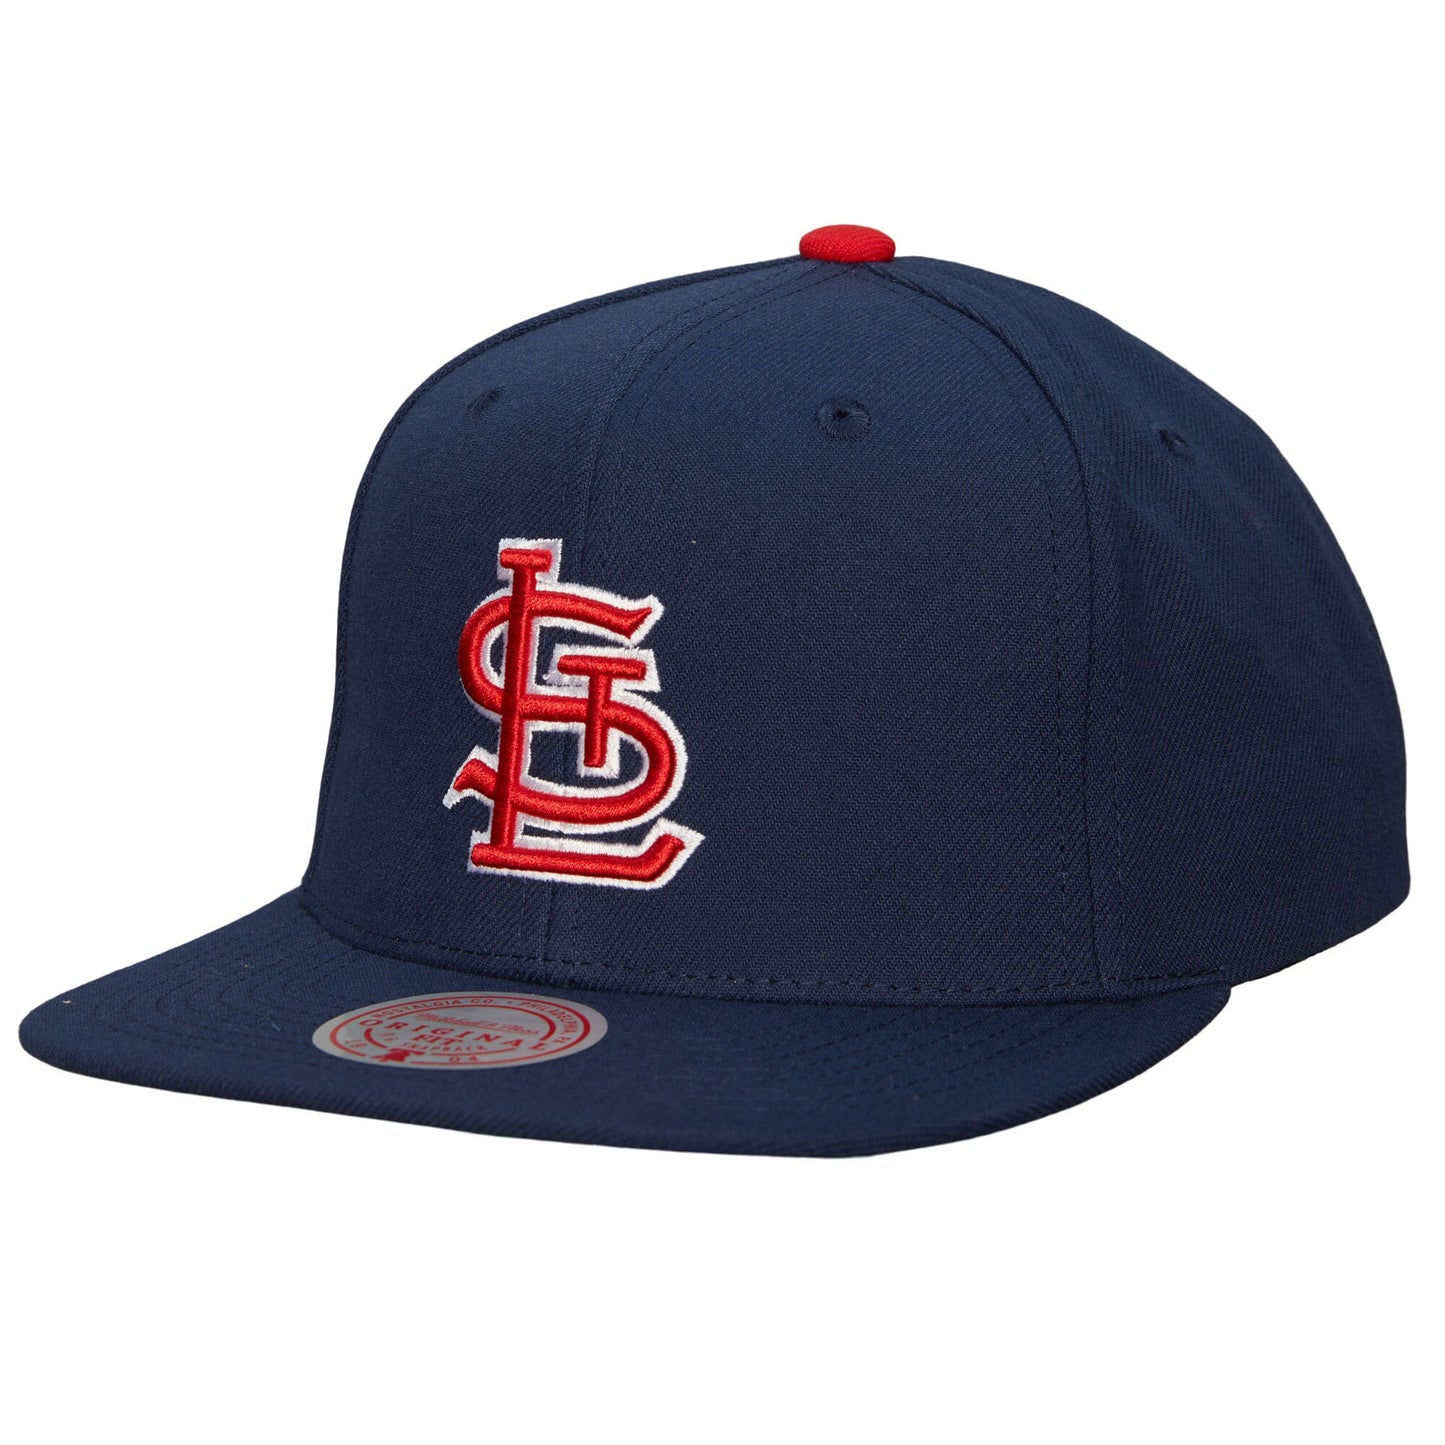 St. Louis Cardinals Mitchell & Ness Cooperstown Collection Evergreen Snapback Hat - Navy